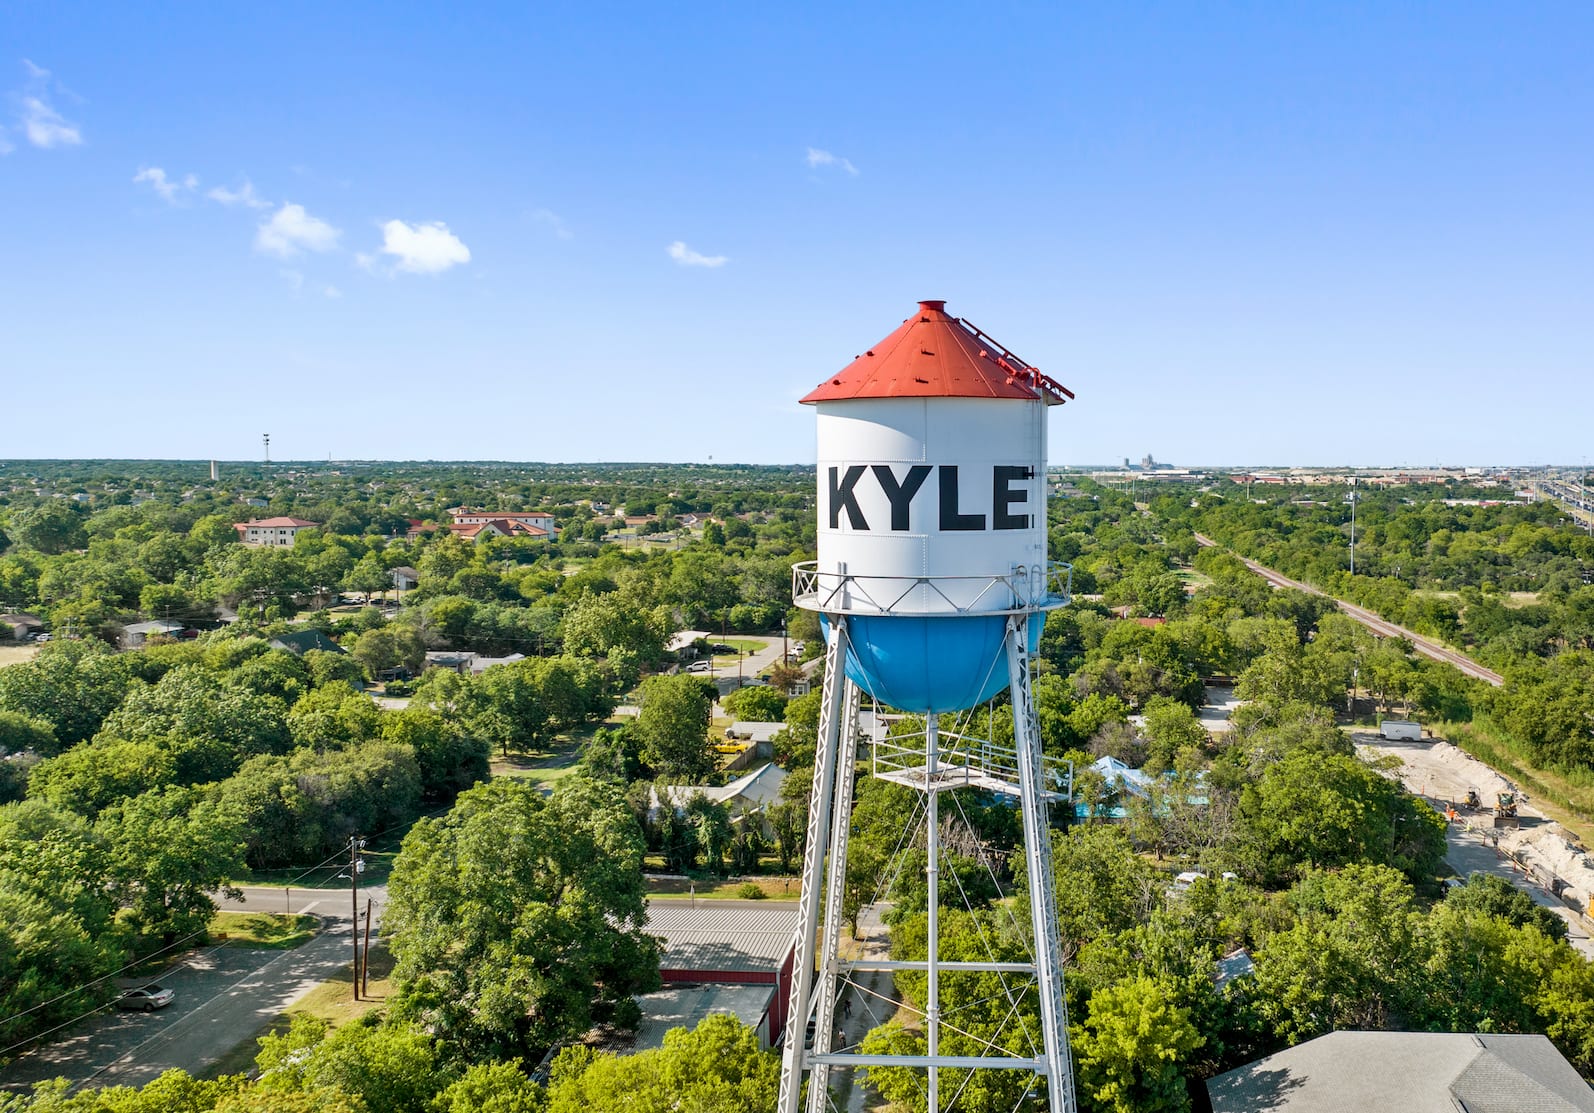 Kyle Texas Water Tower